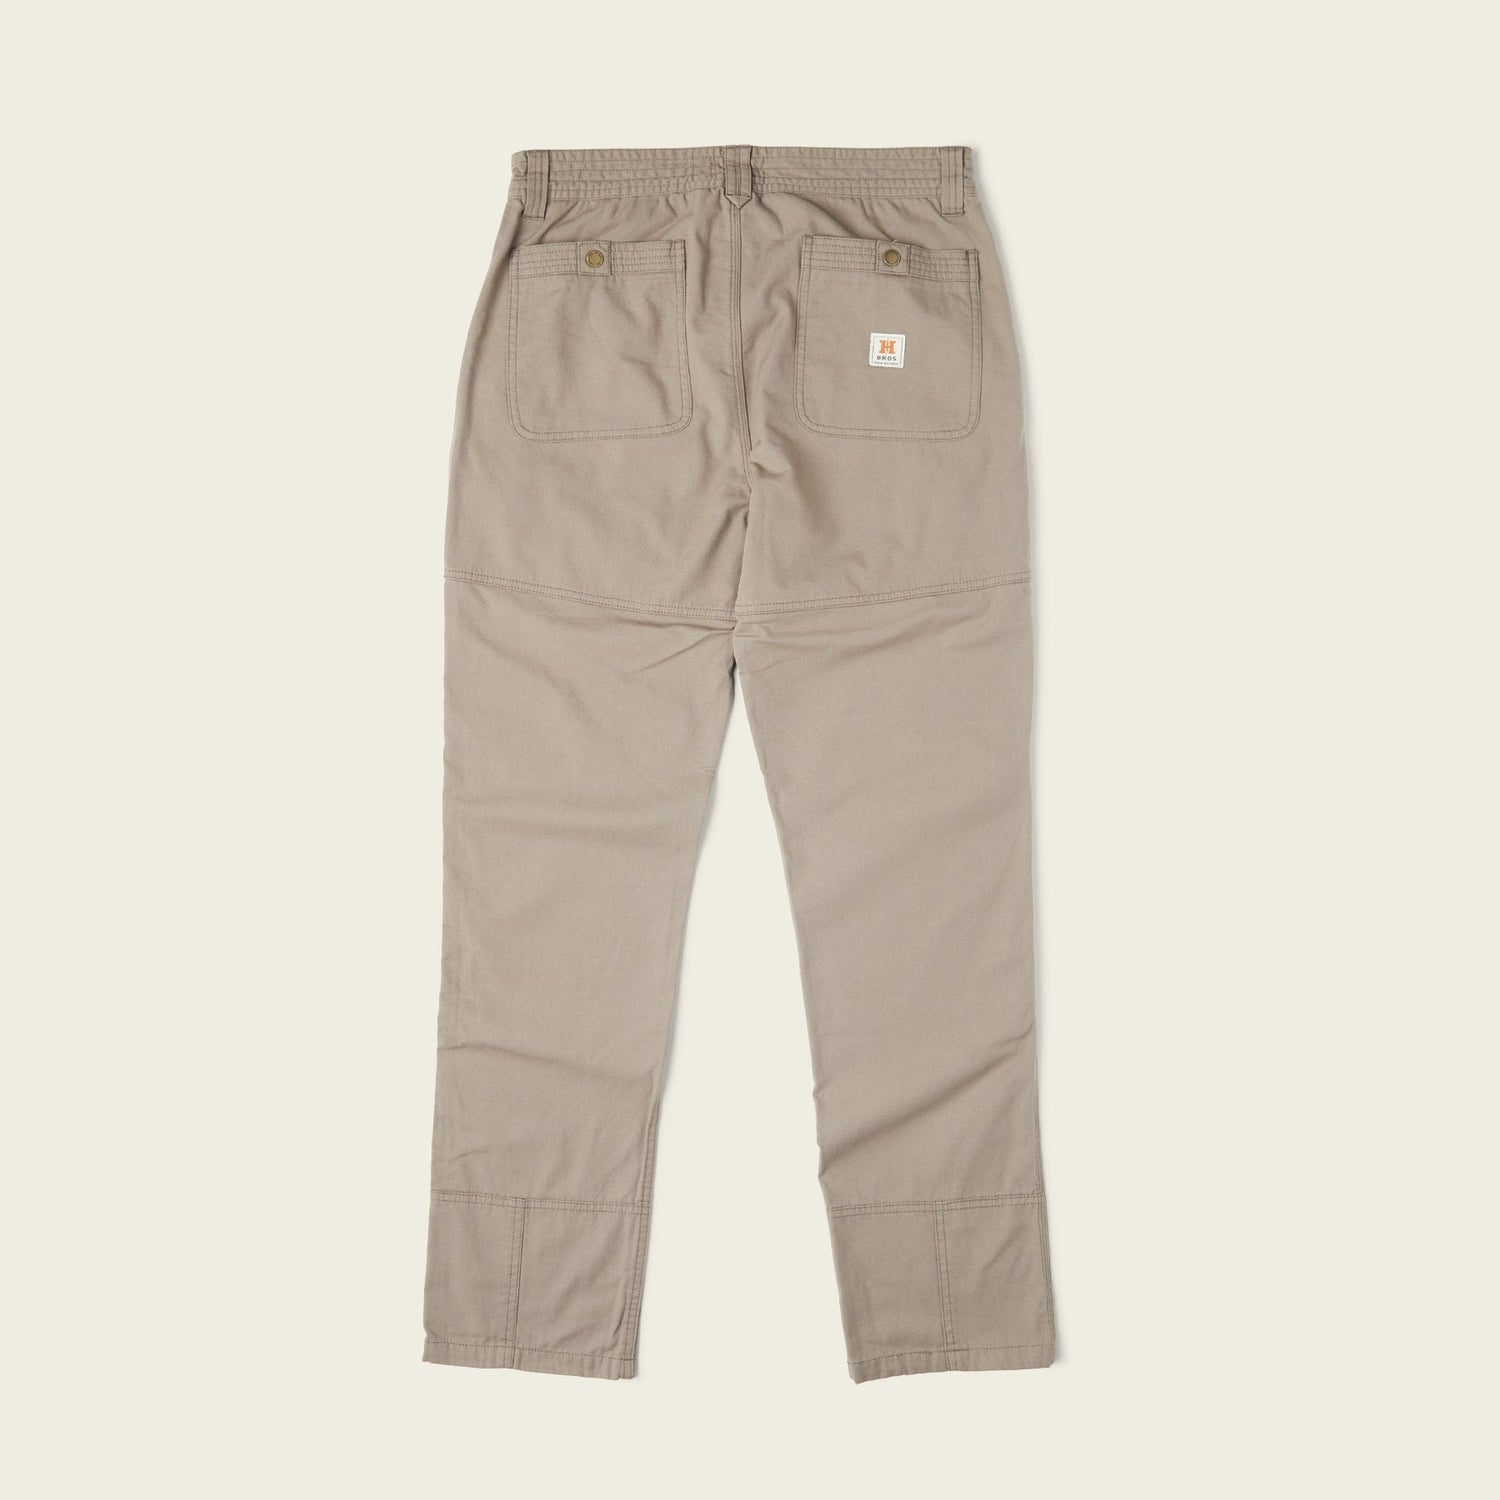 h and m cargo canvas pants｜TikTok Search